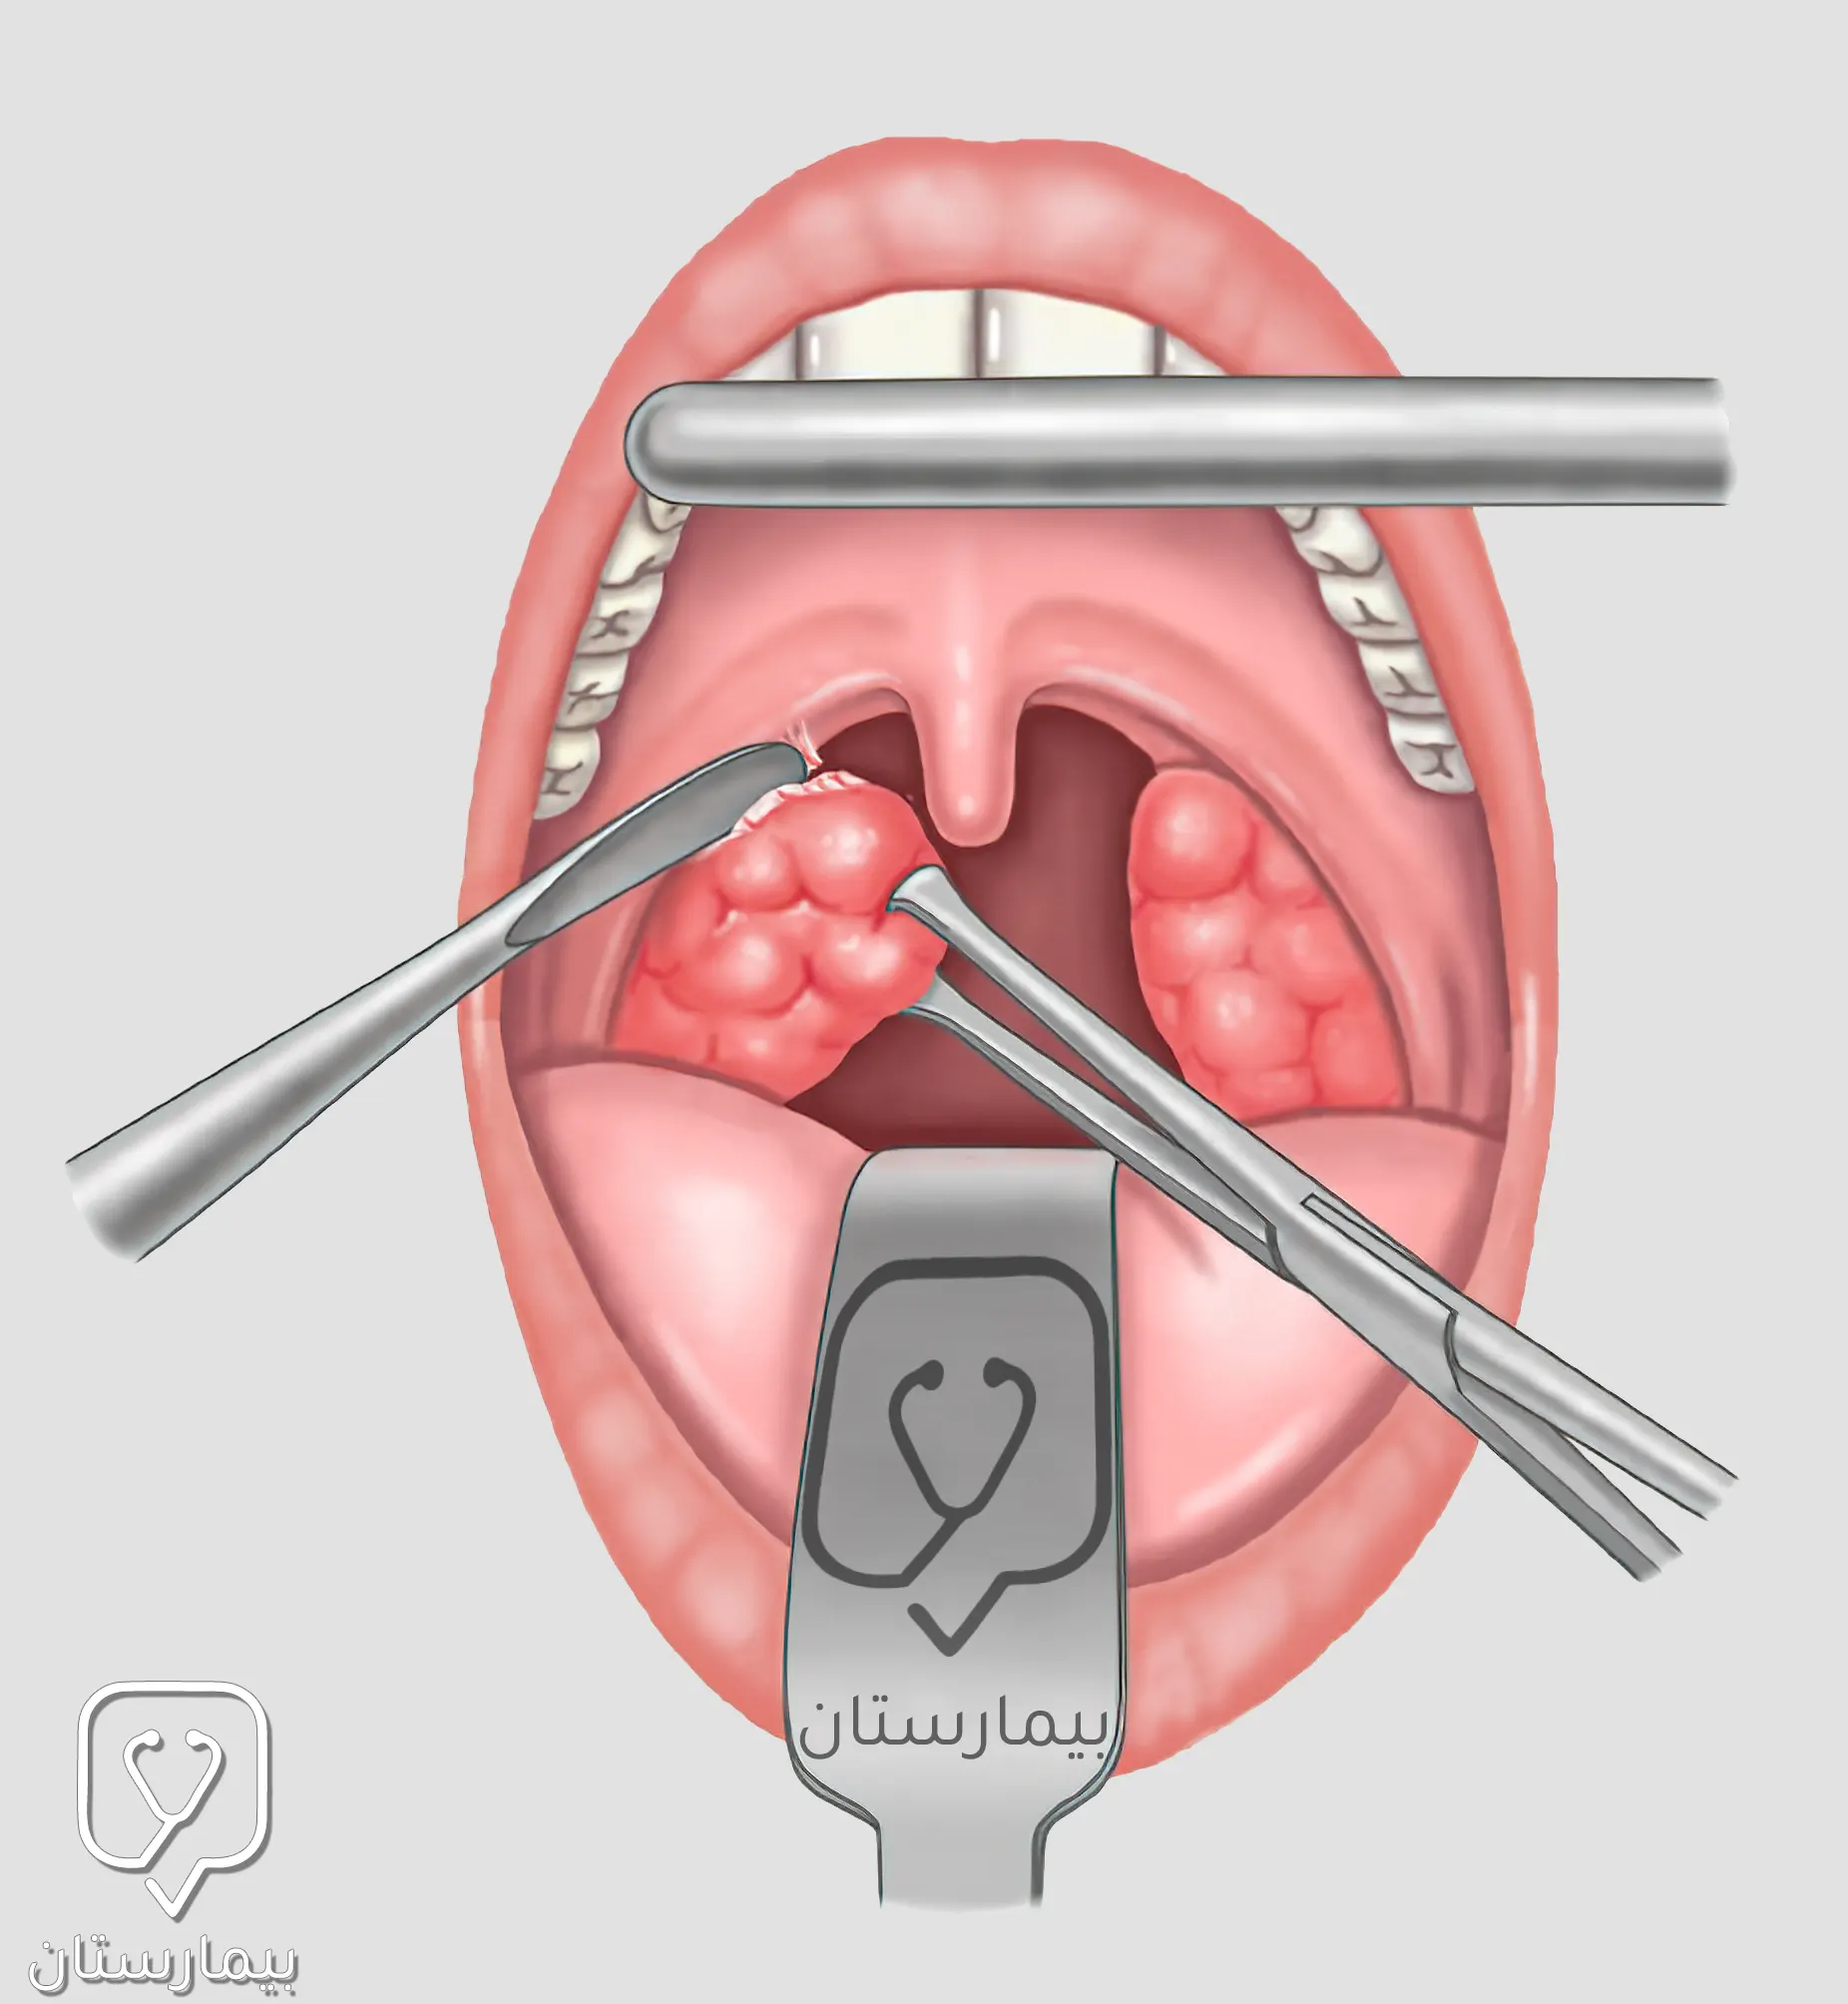 Cold surgical dissection of tonsils